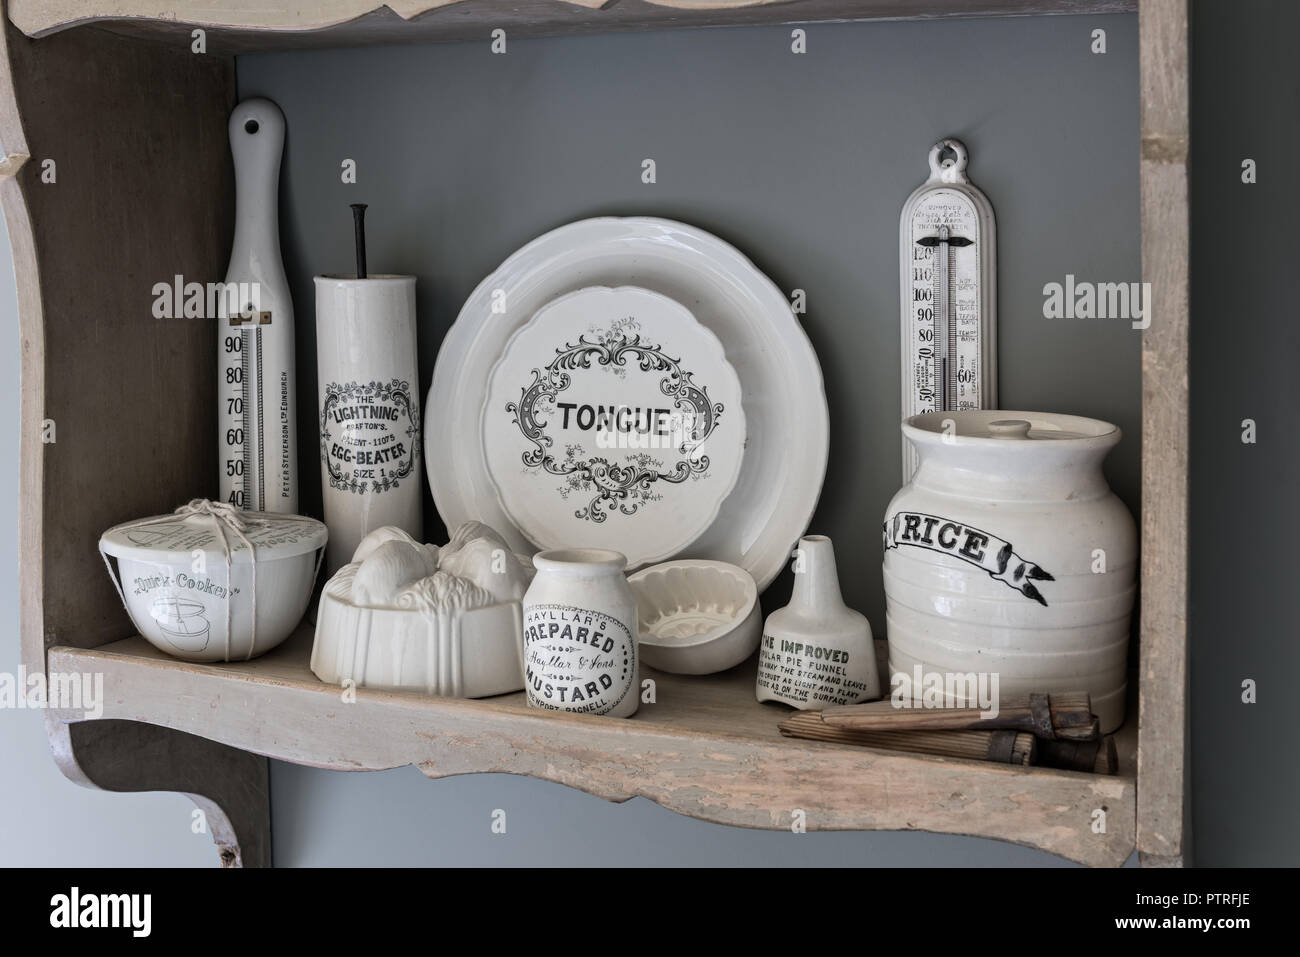 https://c8.alamy.com/comp/PTRFJE/16th-century-farmhouse-renovation-antique-kitchenware-on-wall-mounted-shelf-in-restored-16th-century-farmhouse-PTRFJE.jpg